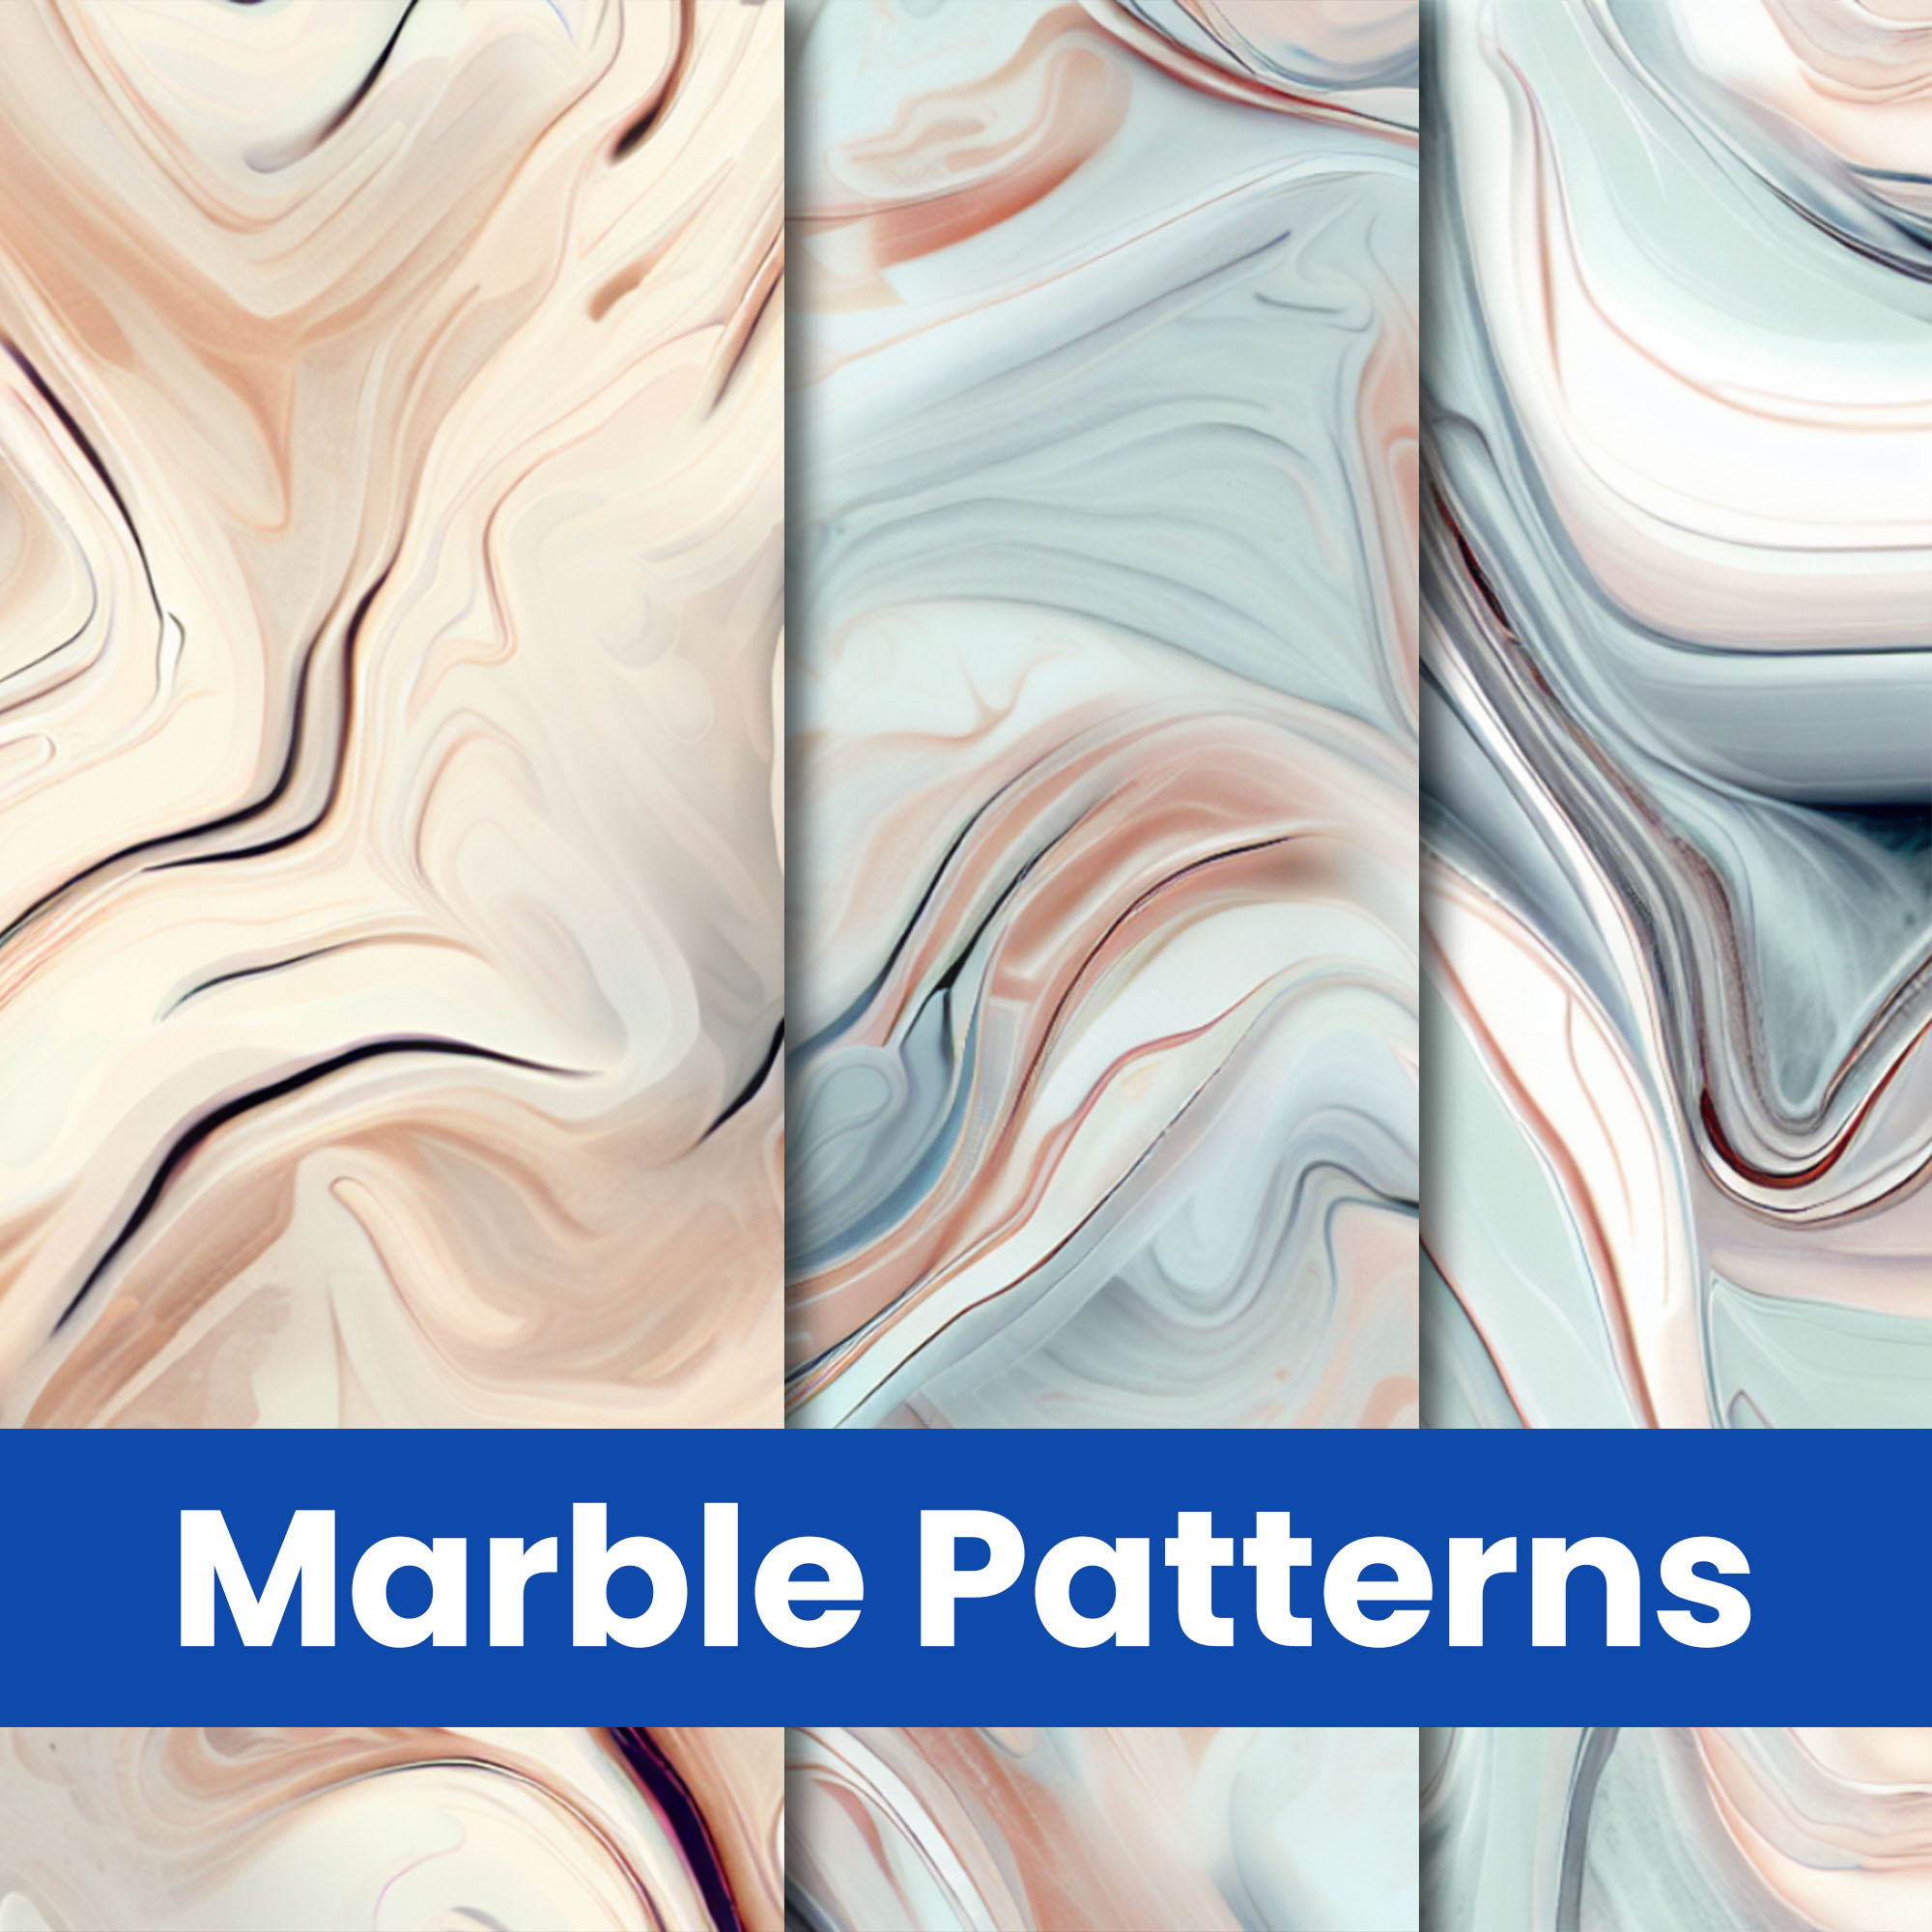 Seamless Marble Pattern cover image.